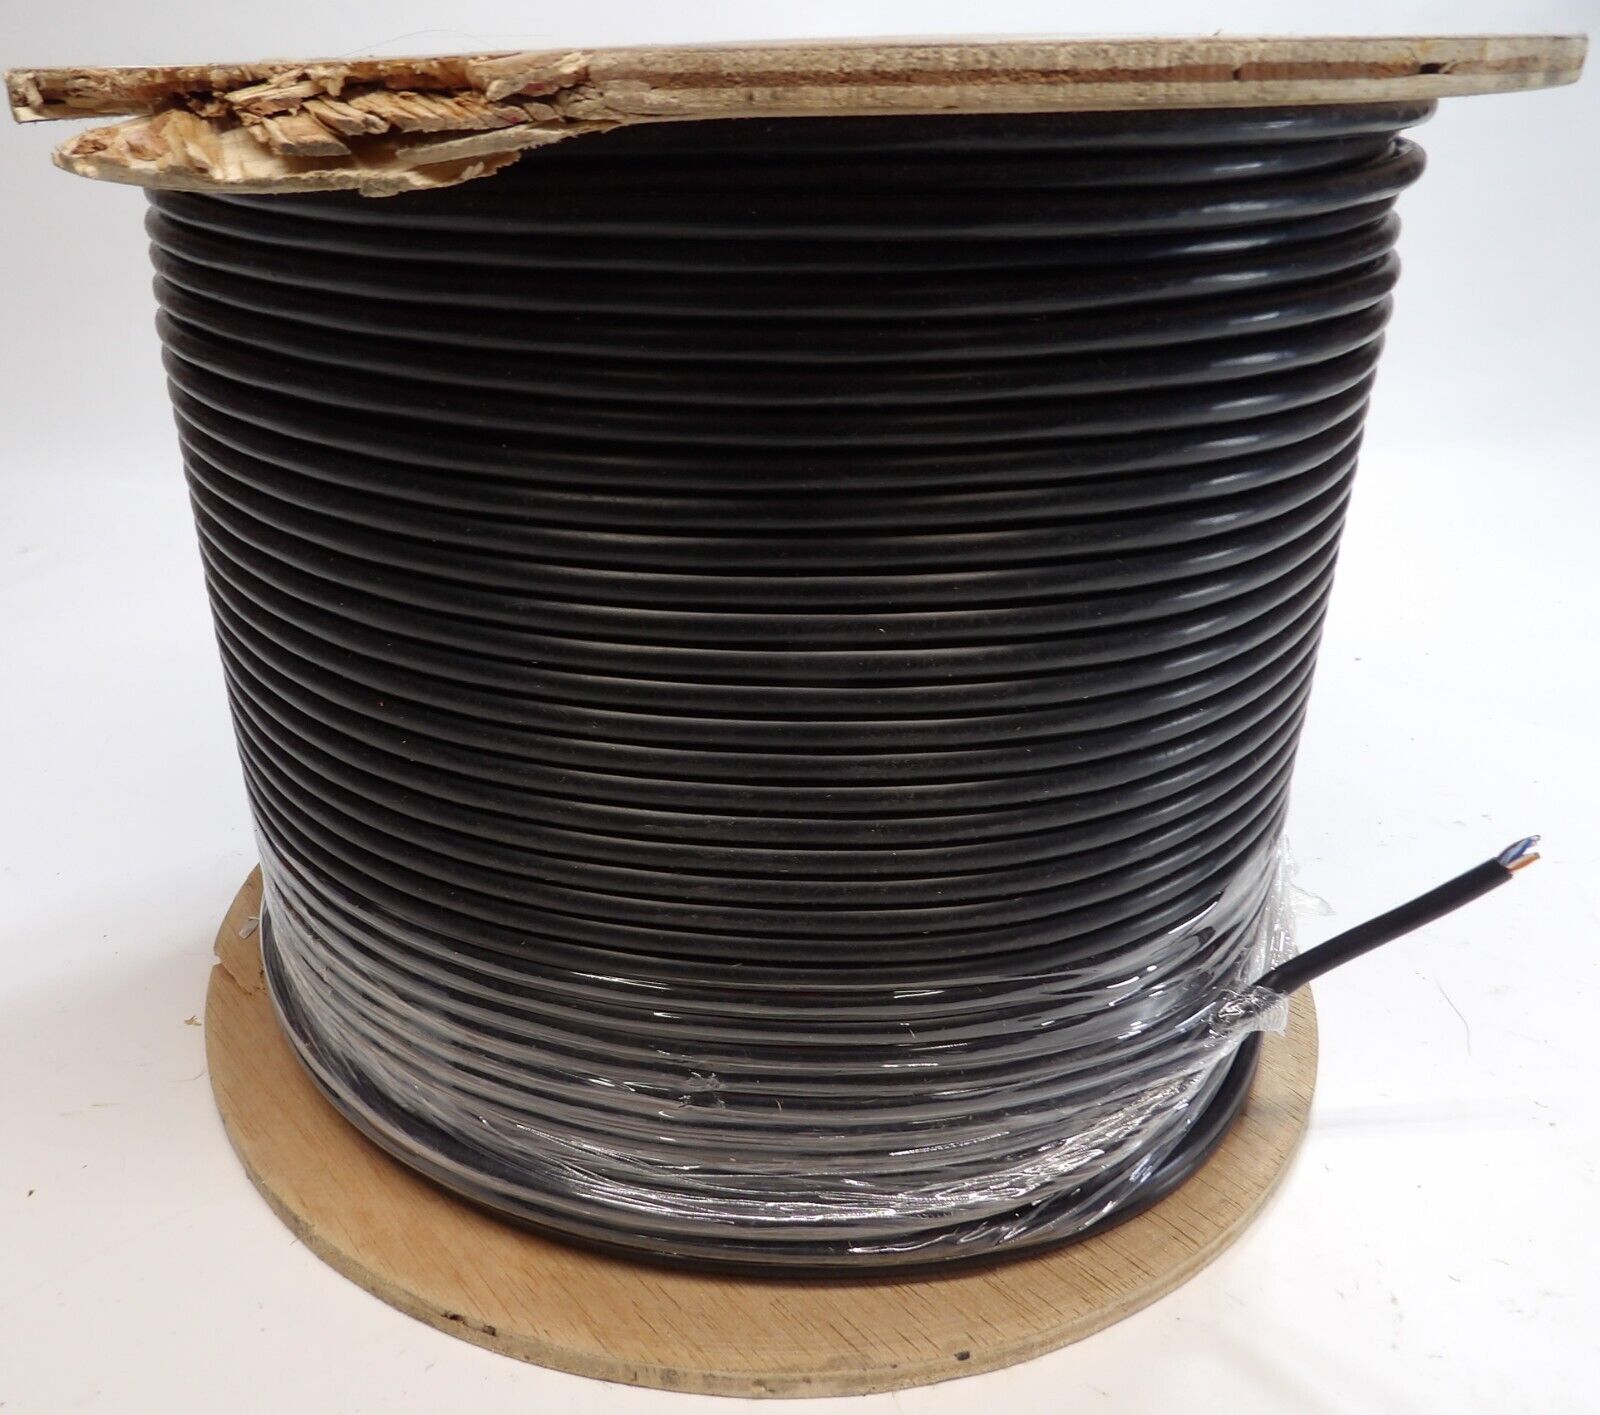 Javex OD-CAT6-Approximate 1000 FT-BK Cat.6 UTP 23 AWG Network Cable - Black